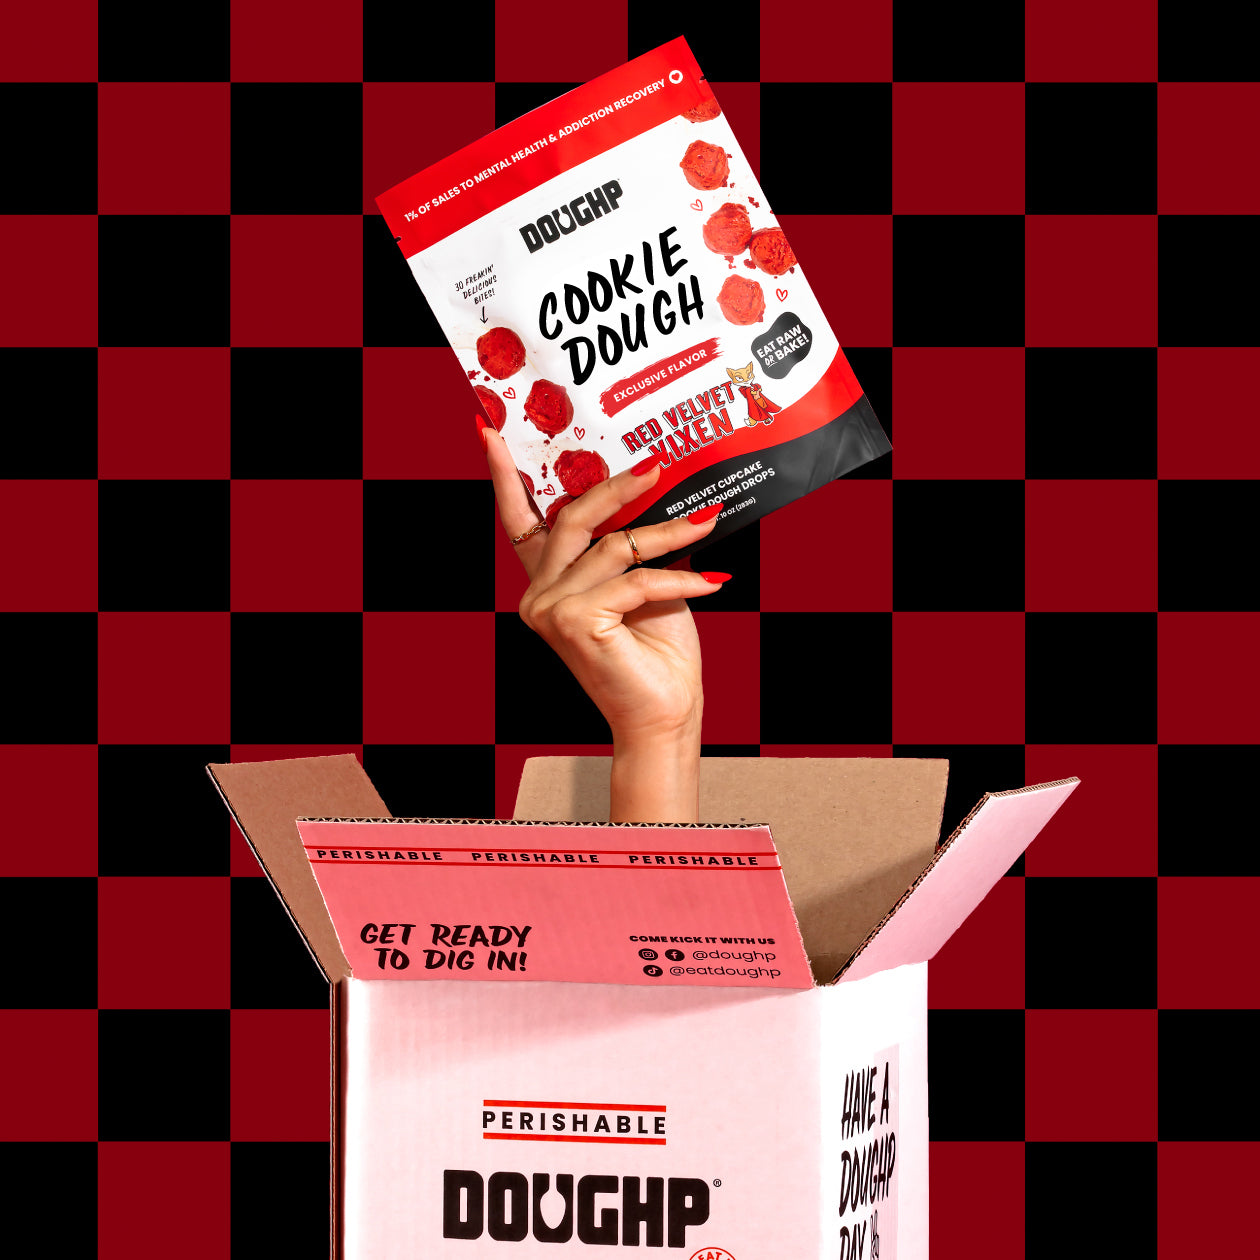 Cookie dough box from Doughp with hand coming out from it holding a Red Velvet flavored pouch of Doughp cookie dough drops